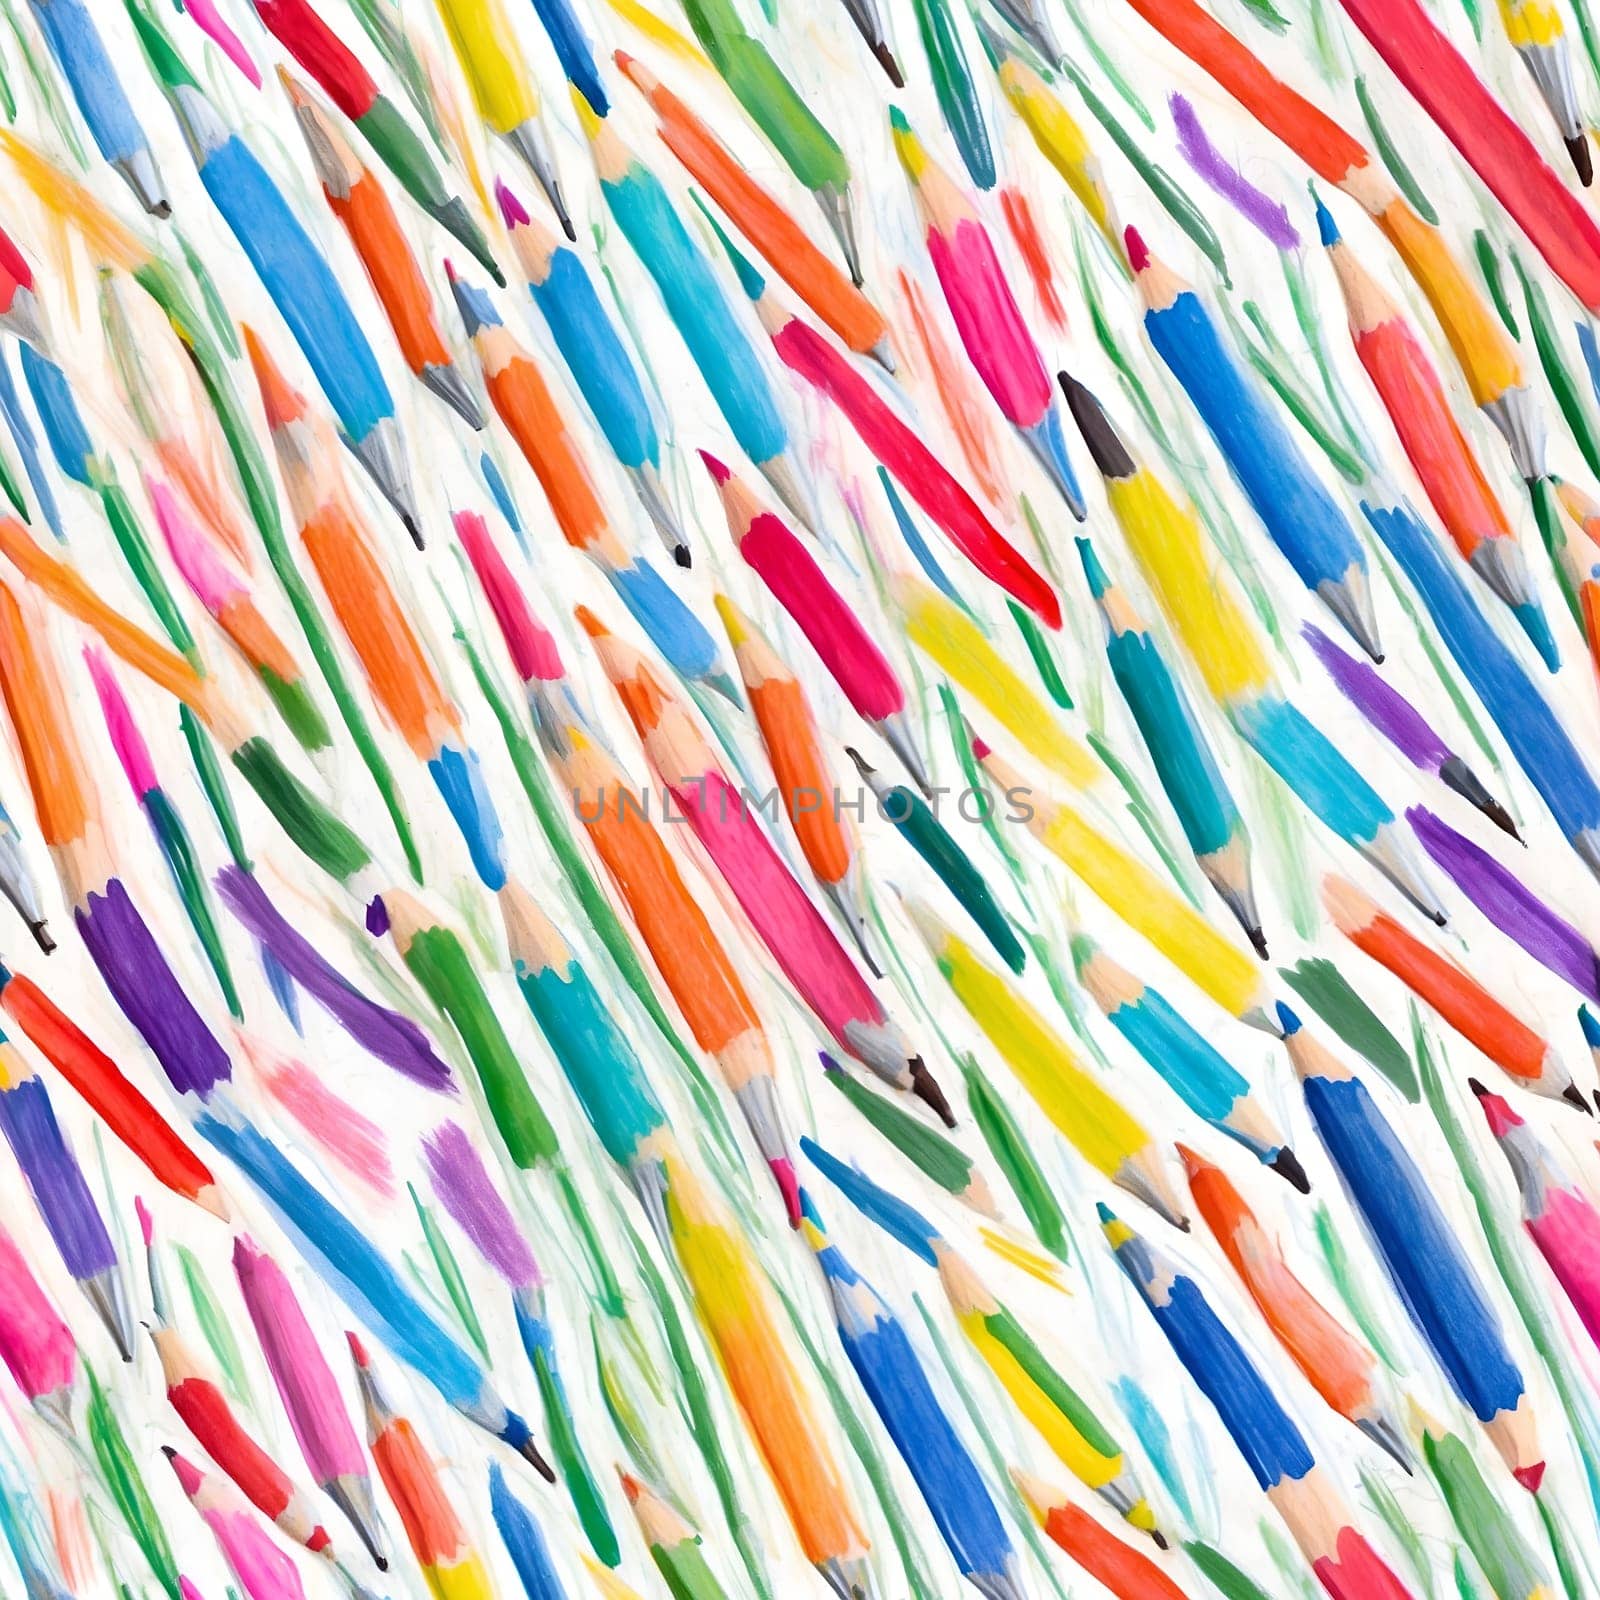 A seamless pattern featuring a painting of numerous colored pencils on a plain white background.